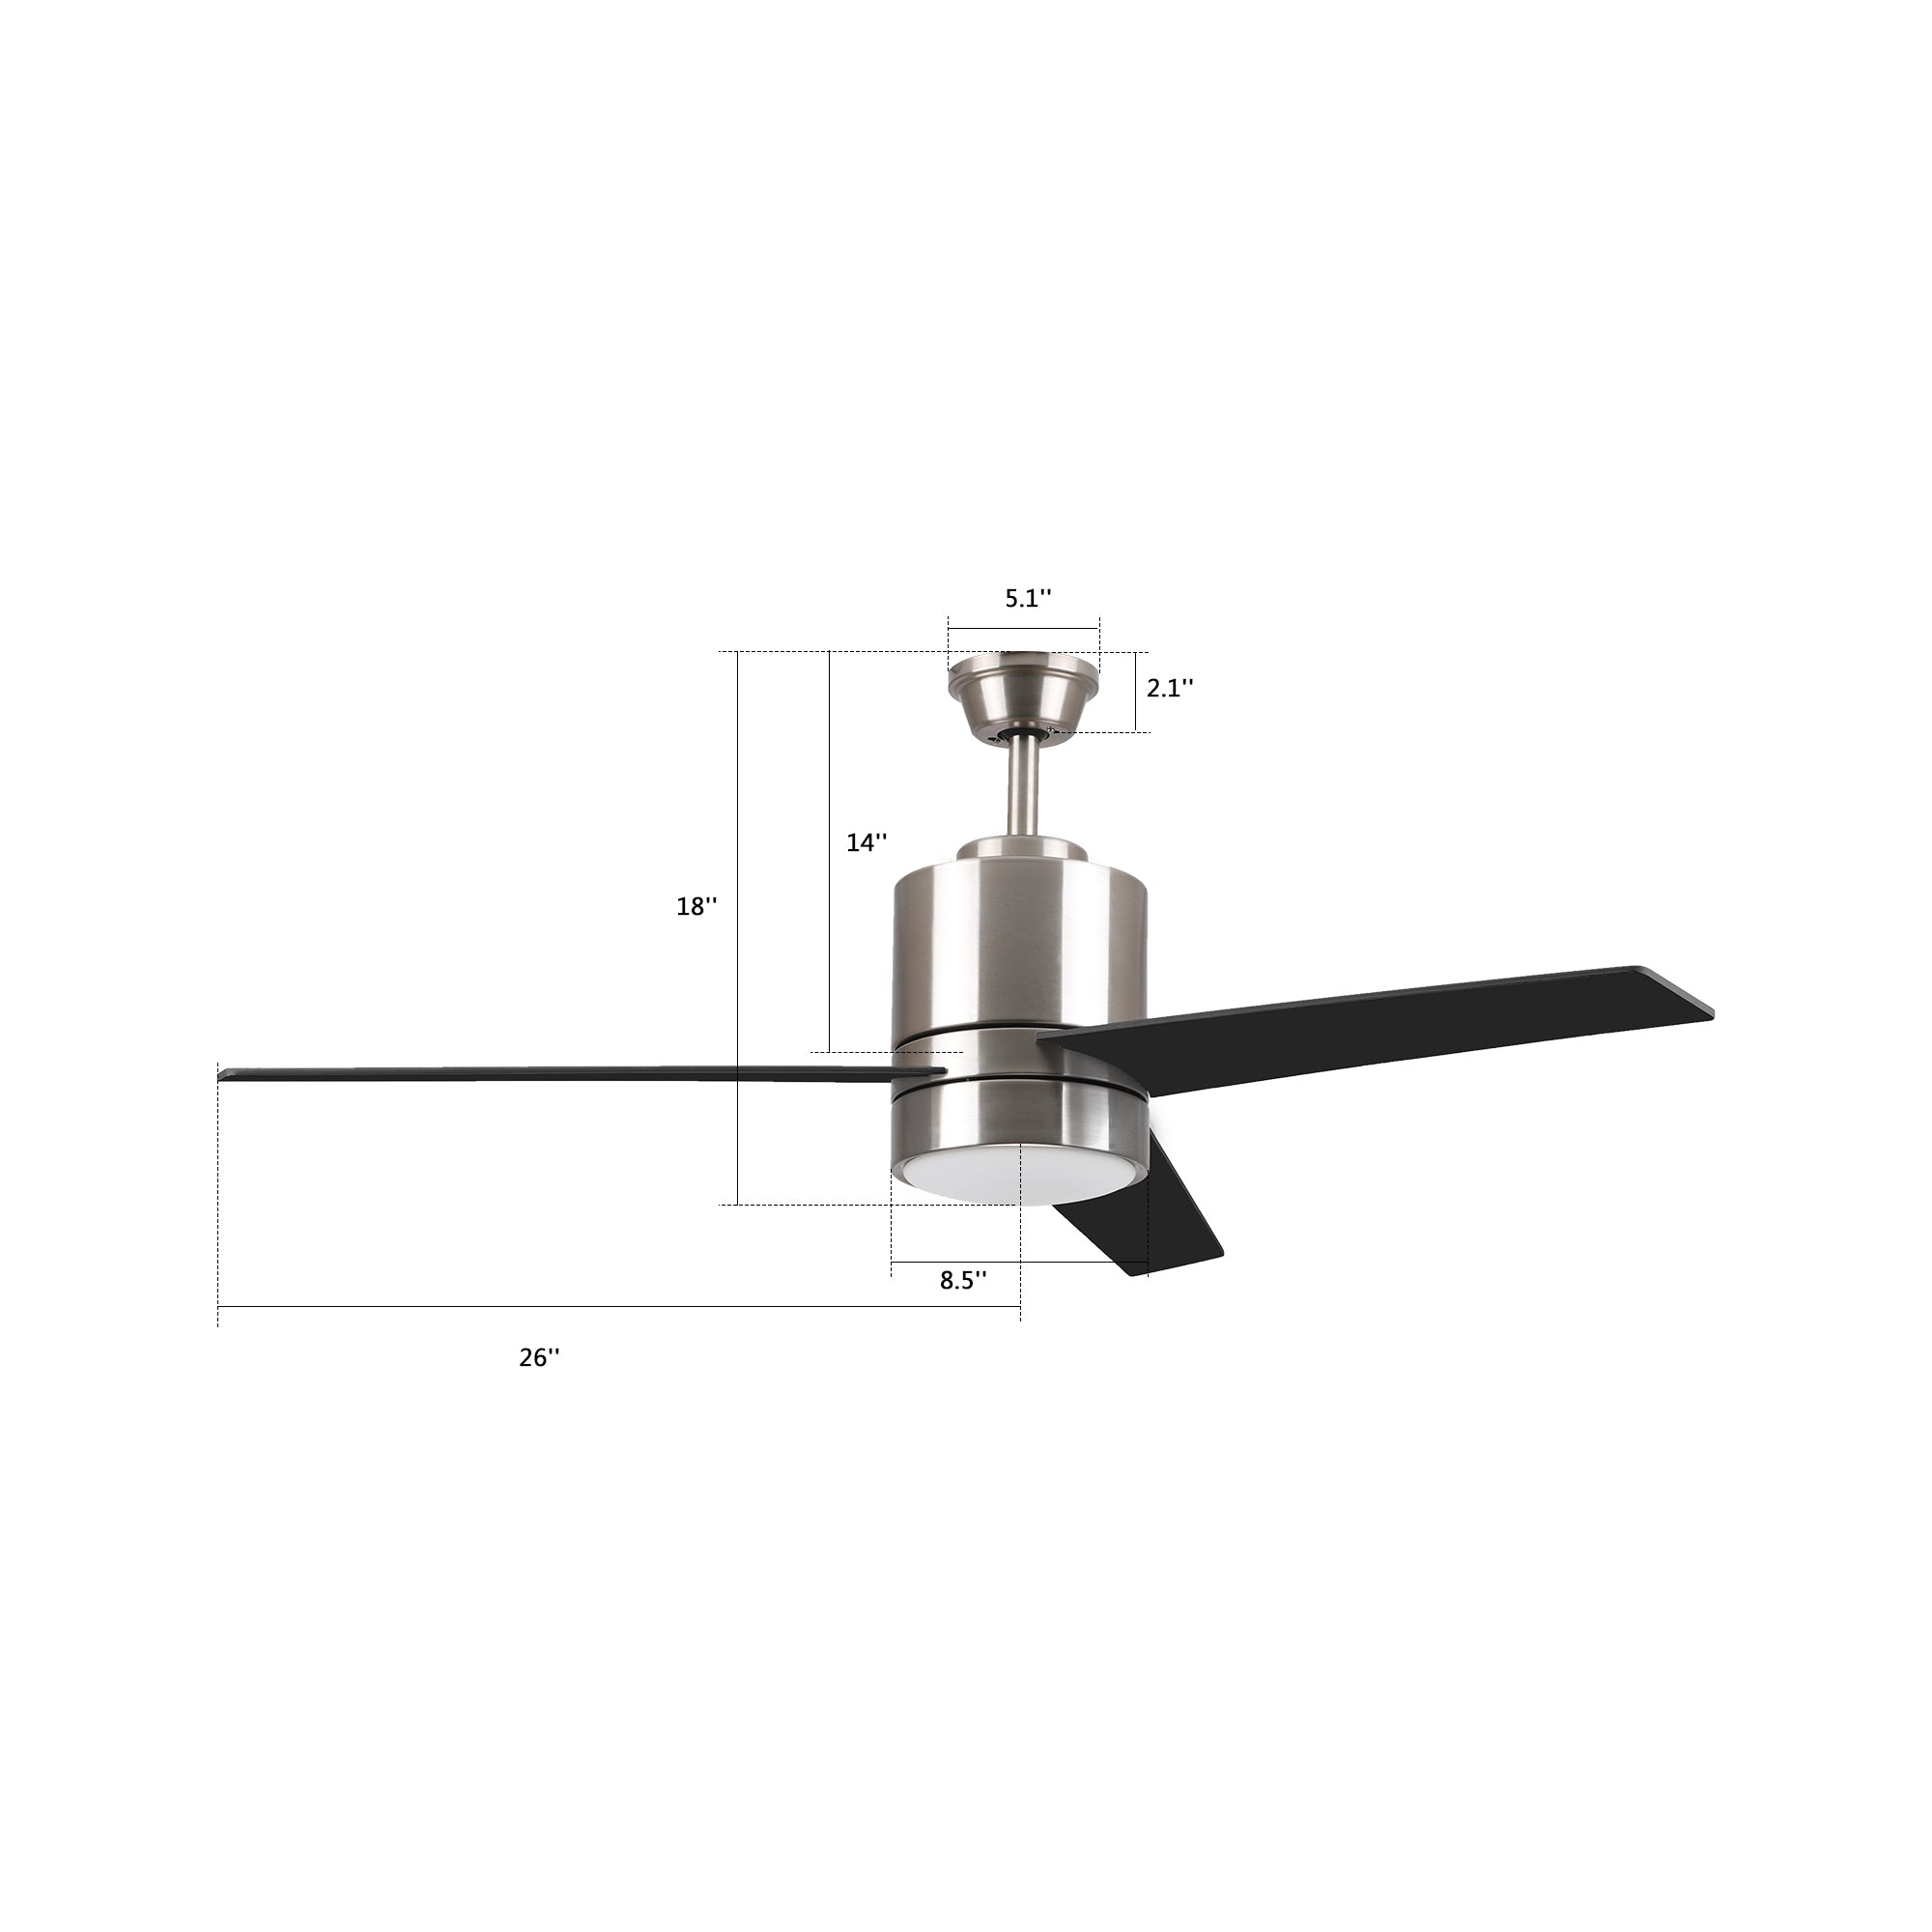 This Ranger Wifi smart ceiling fan is a simplicity designing with elegant Plywood reversible black and light wood blades and has an integrated 3000K LED warm light. The fan features wall control, Wi-Fi apps, Siri Shortcut and Voice control technology (compatible with Amazon Alexa and Google Home Assistant ) to set fan preferences. 